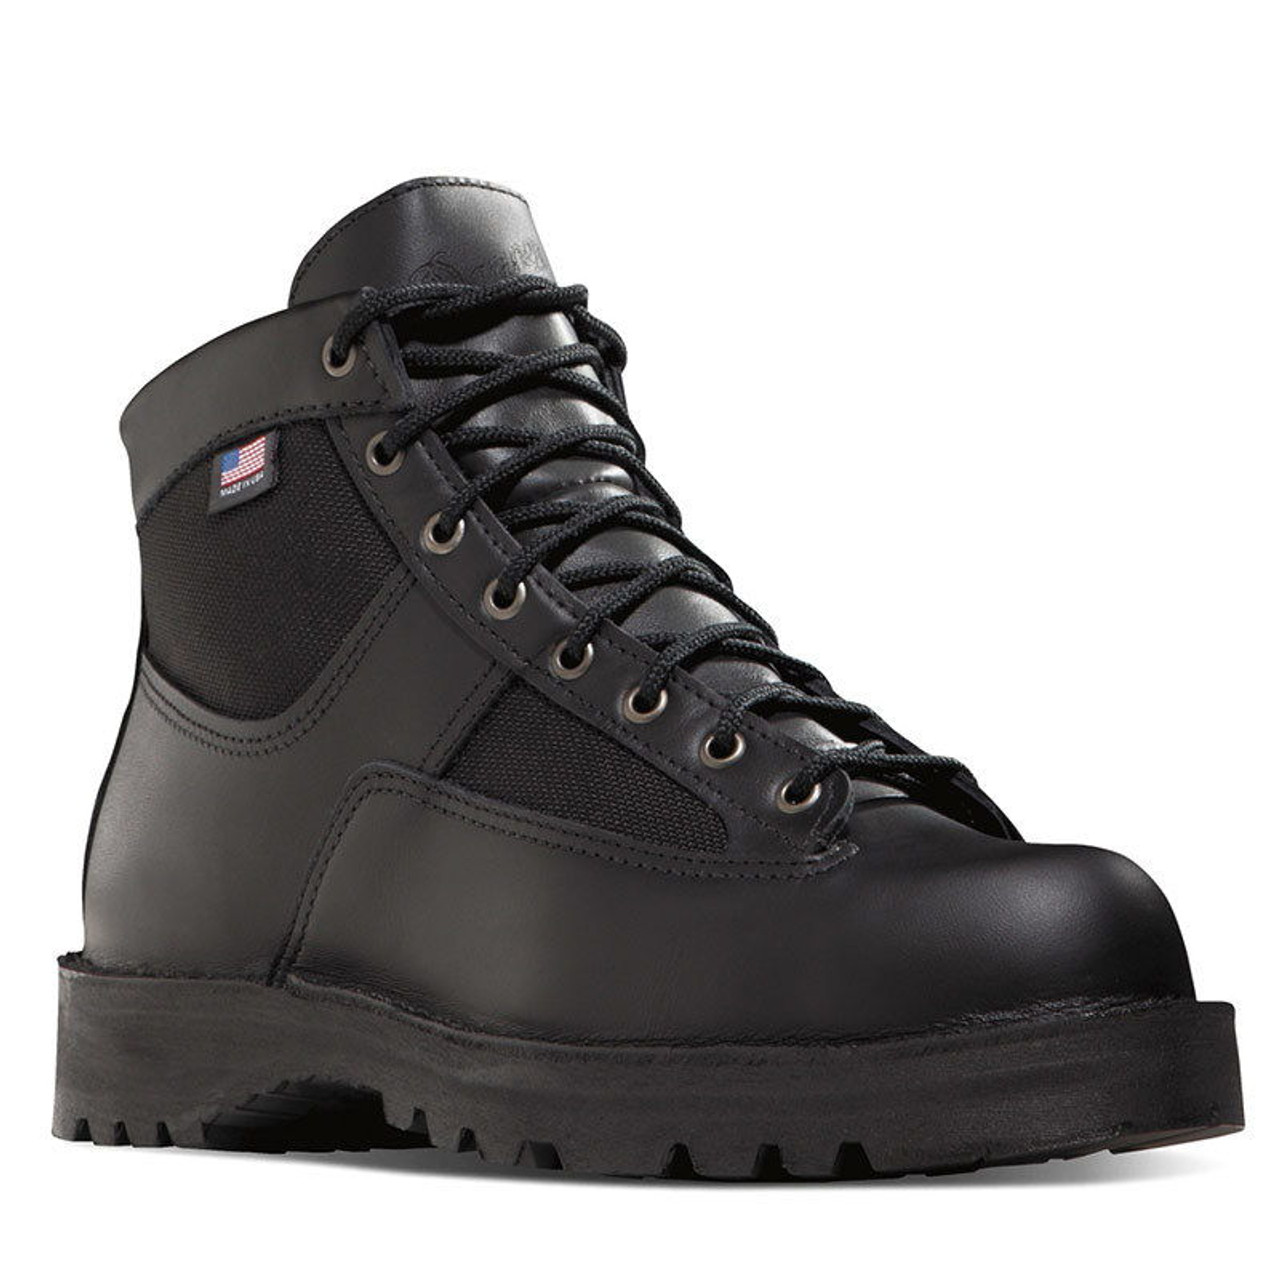 Danner 25200 Men's USA MADE BERRY COMPLIANT PATROL Duty Boots GORE ...